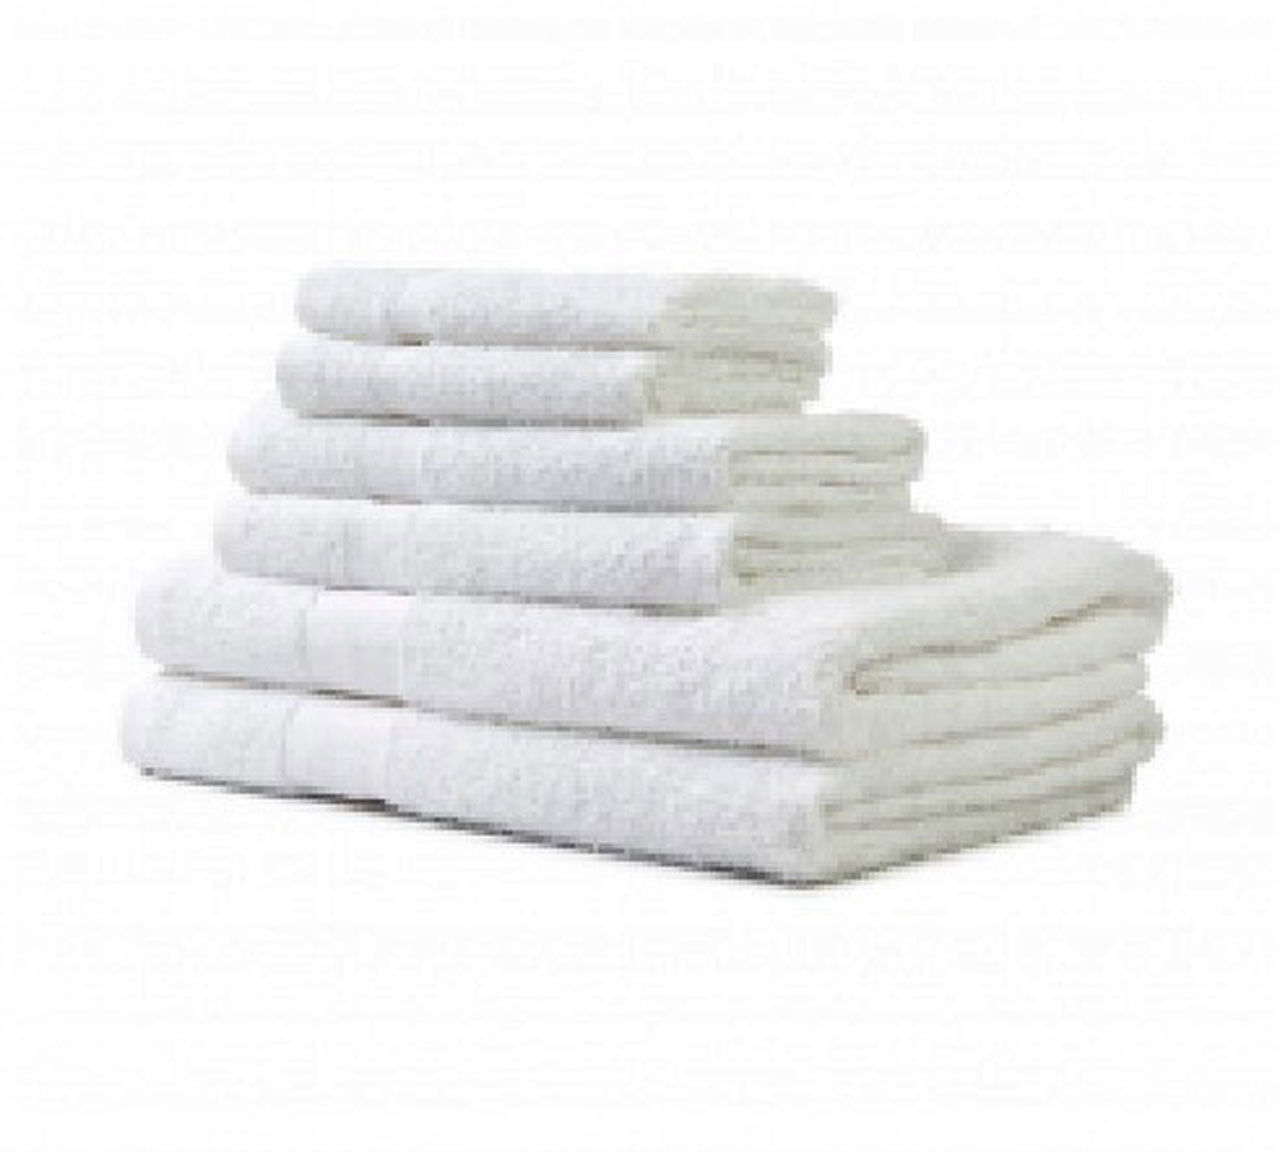 Can buying these towels from a jewel wholesale reduce my business costs?